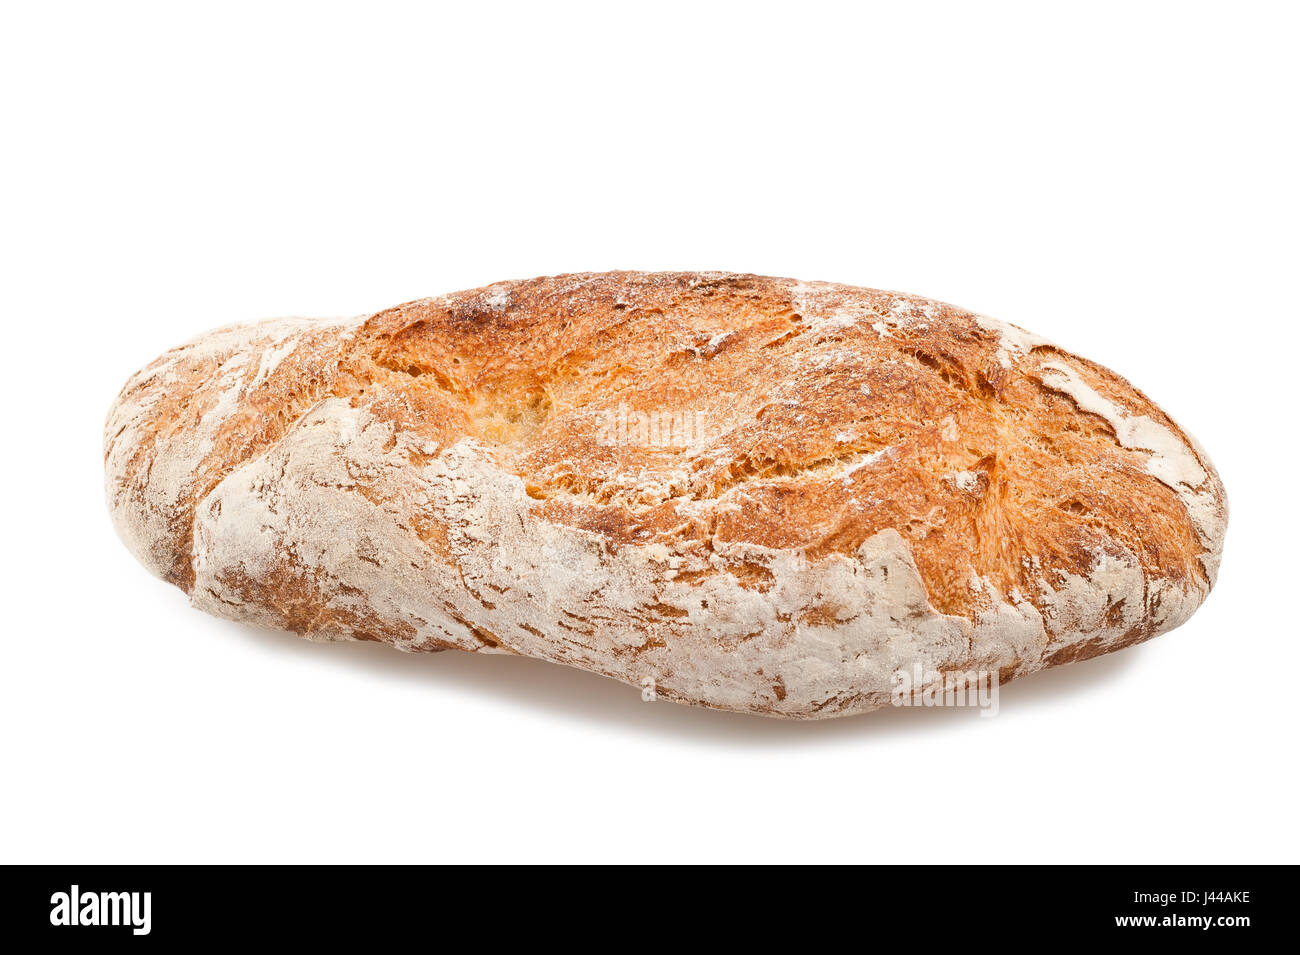 Loaf of bread isolated on white Stock Photo